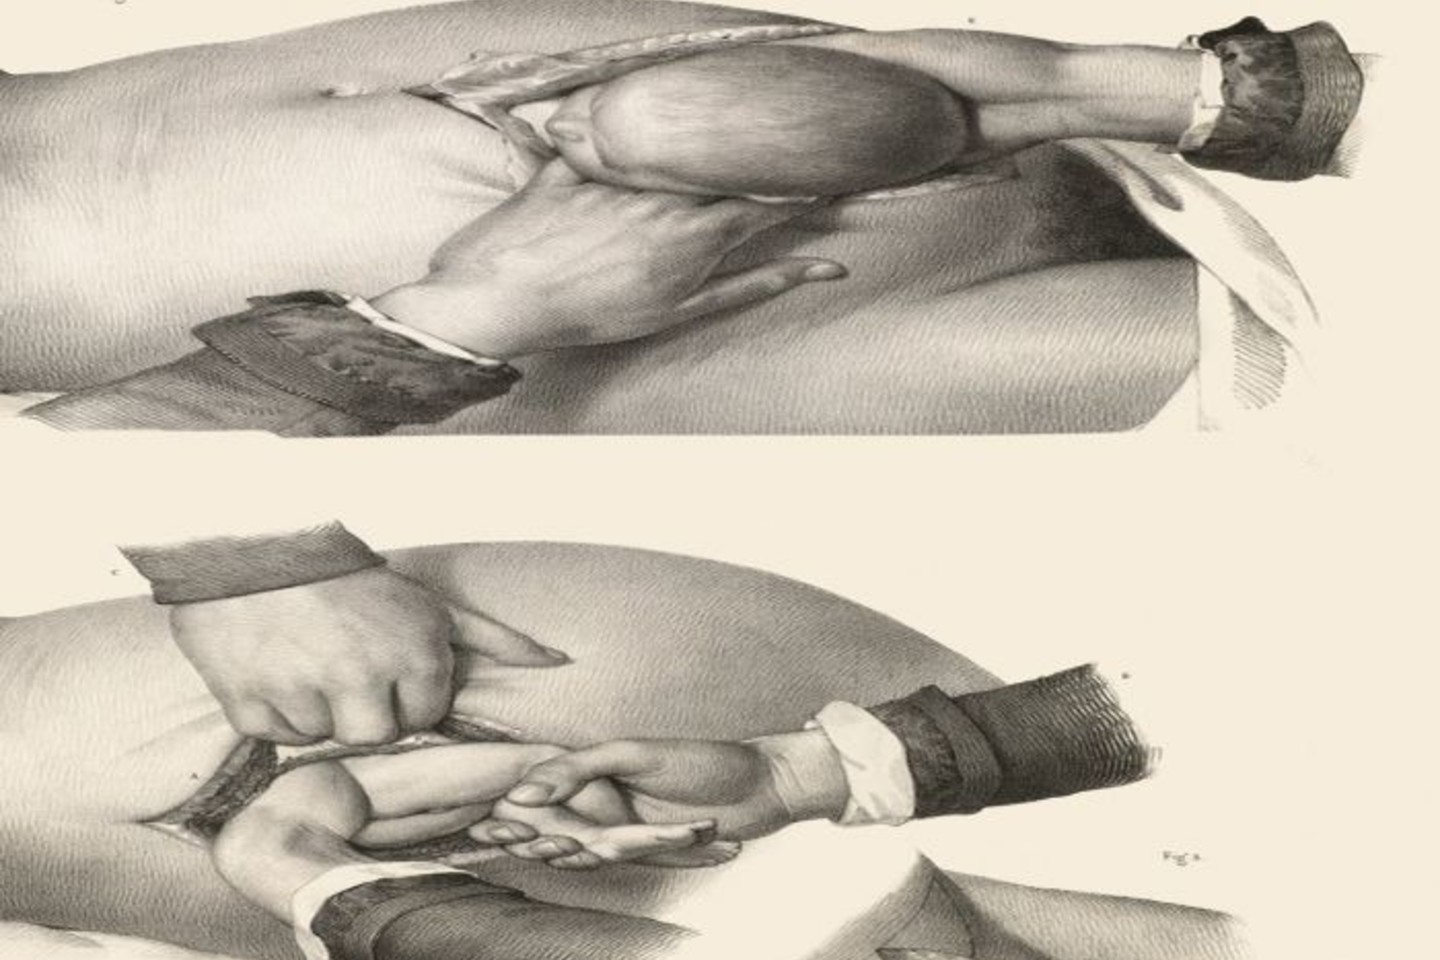 Cezario pjūvis.<br>Crucial Interventions or, An Illustrated Treatise on the Principles &amp; Practice of Surgery by Richard Barnett.